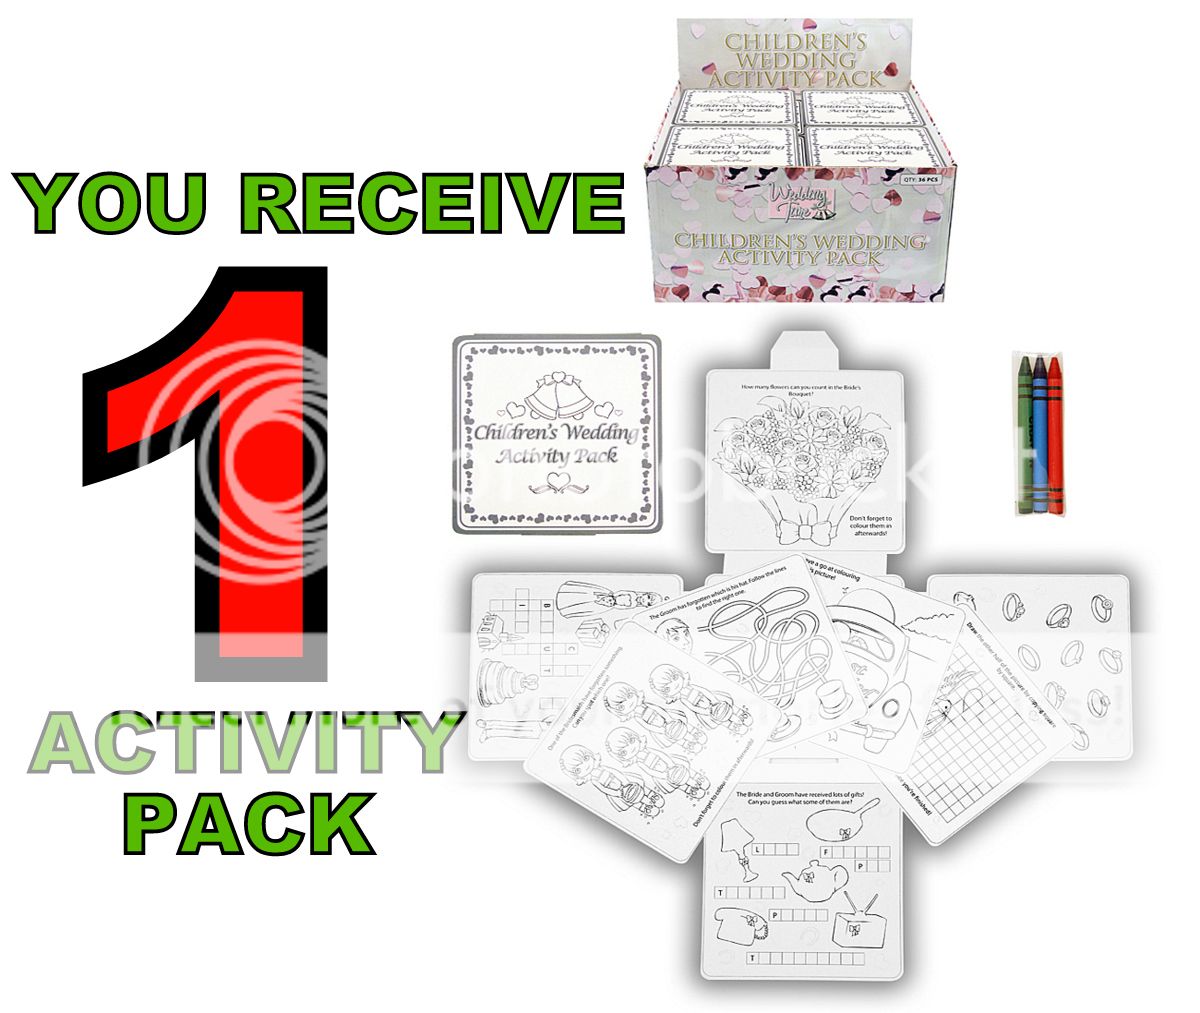 Kids Childrens Wedding Activity Pack Puzzles Crayons Colouring Book Travel Games